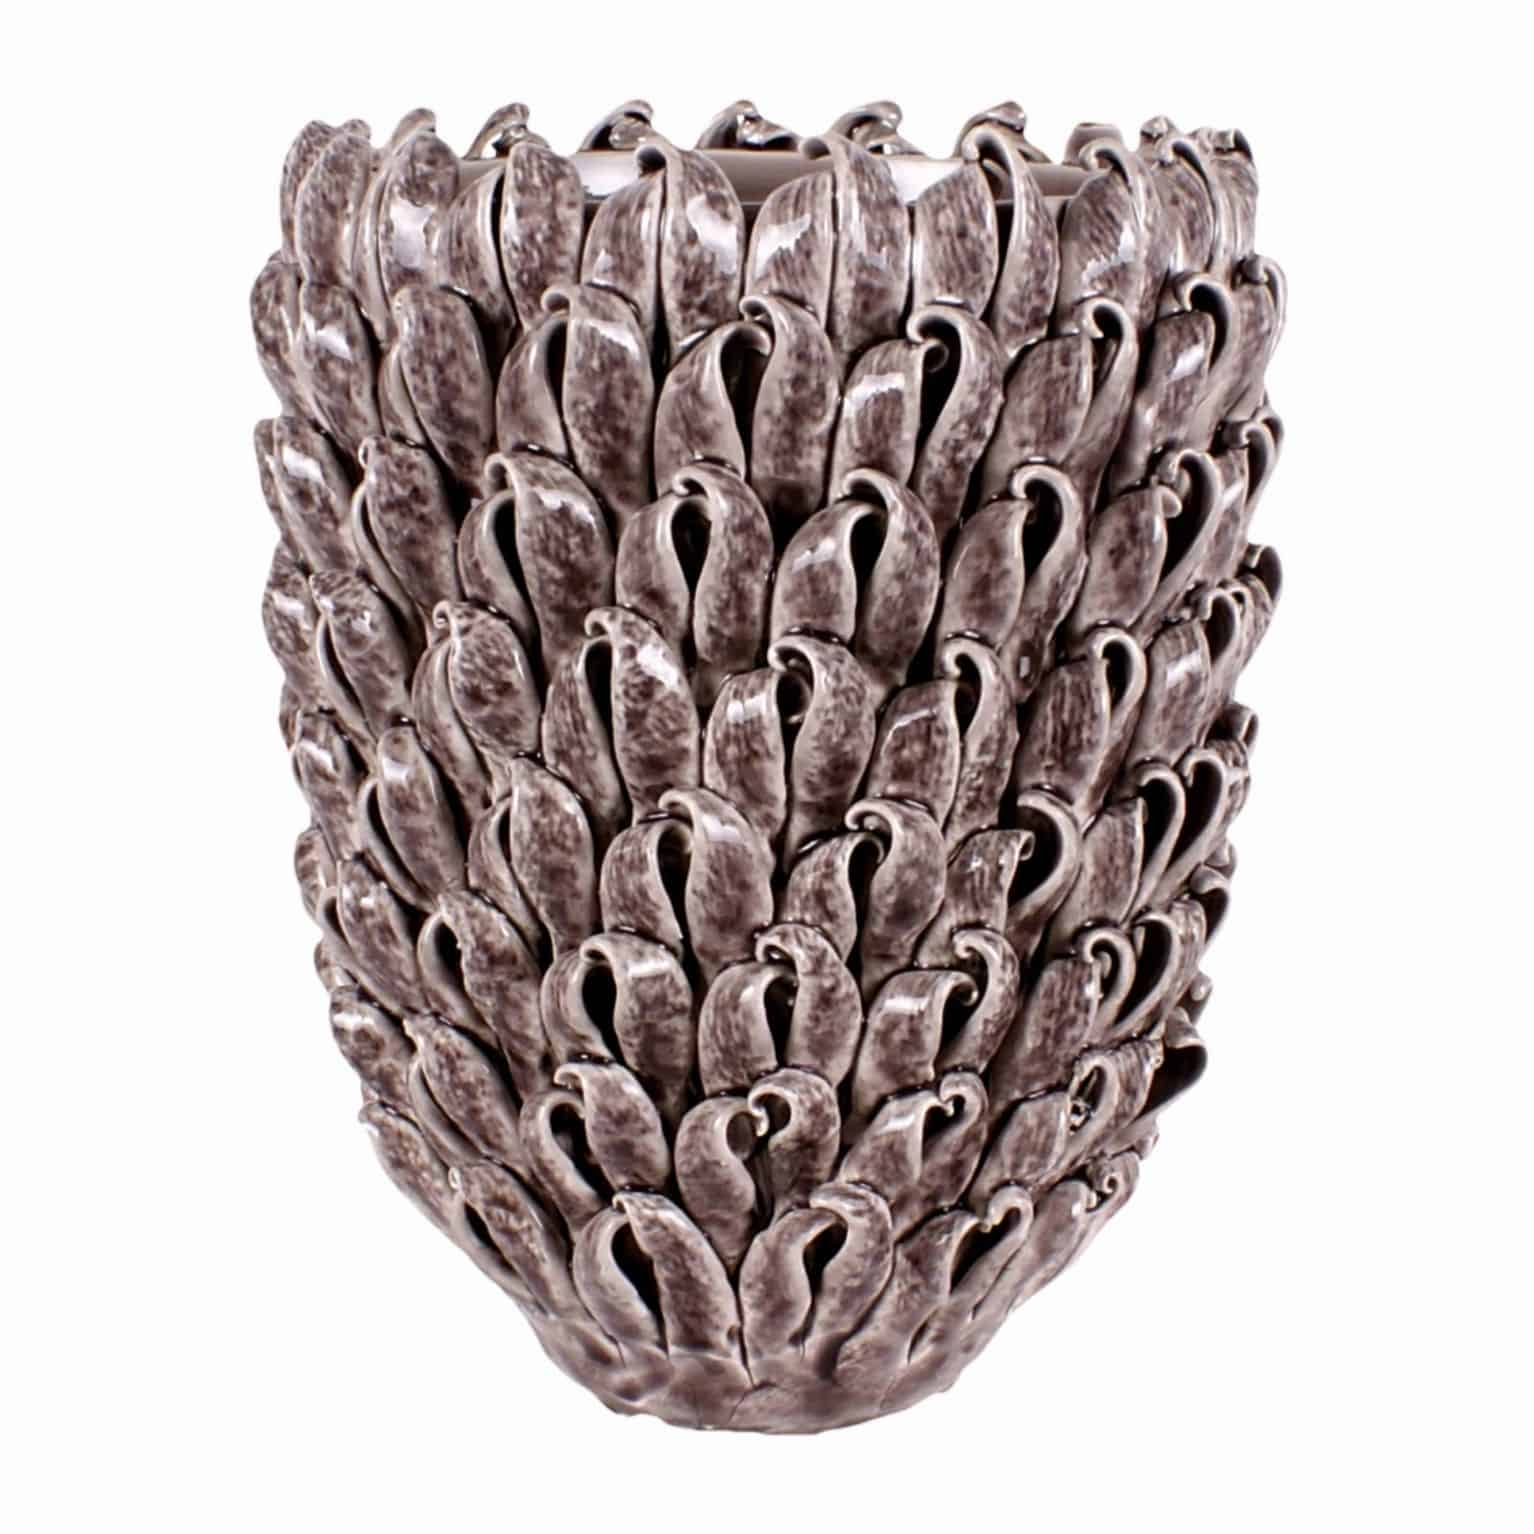 Buy our distinctive hand made seashell effect ceramic flower vase. Strong enough for large flower arrangements and plants. A modern showpiece for any home.